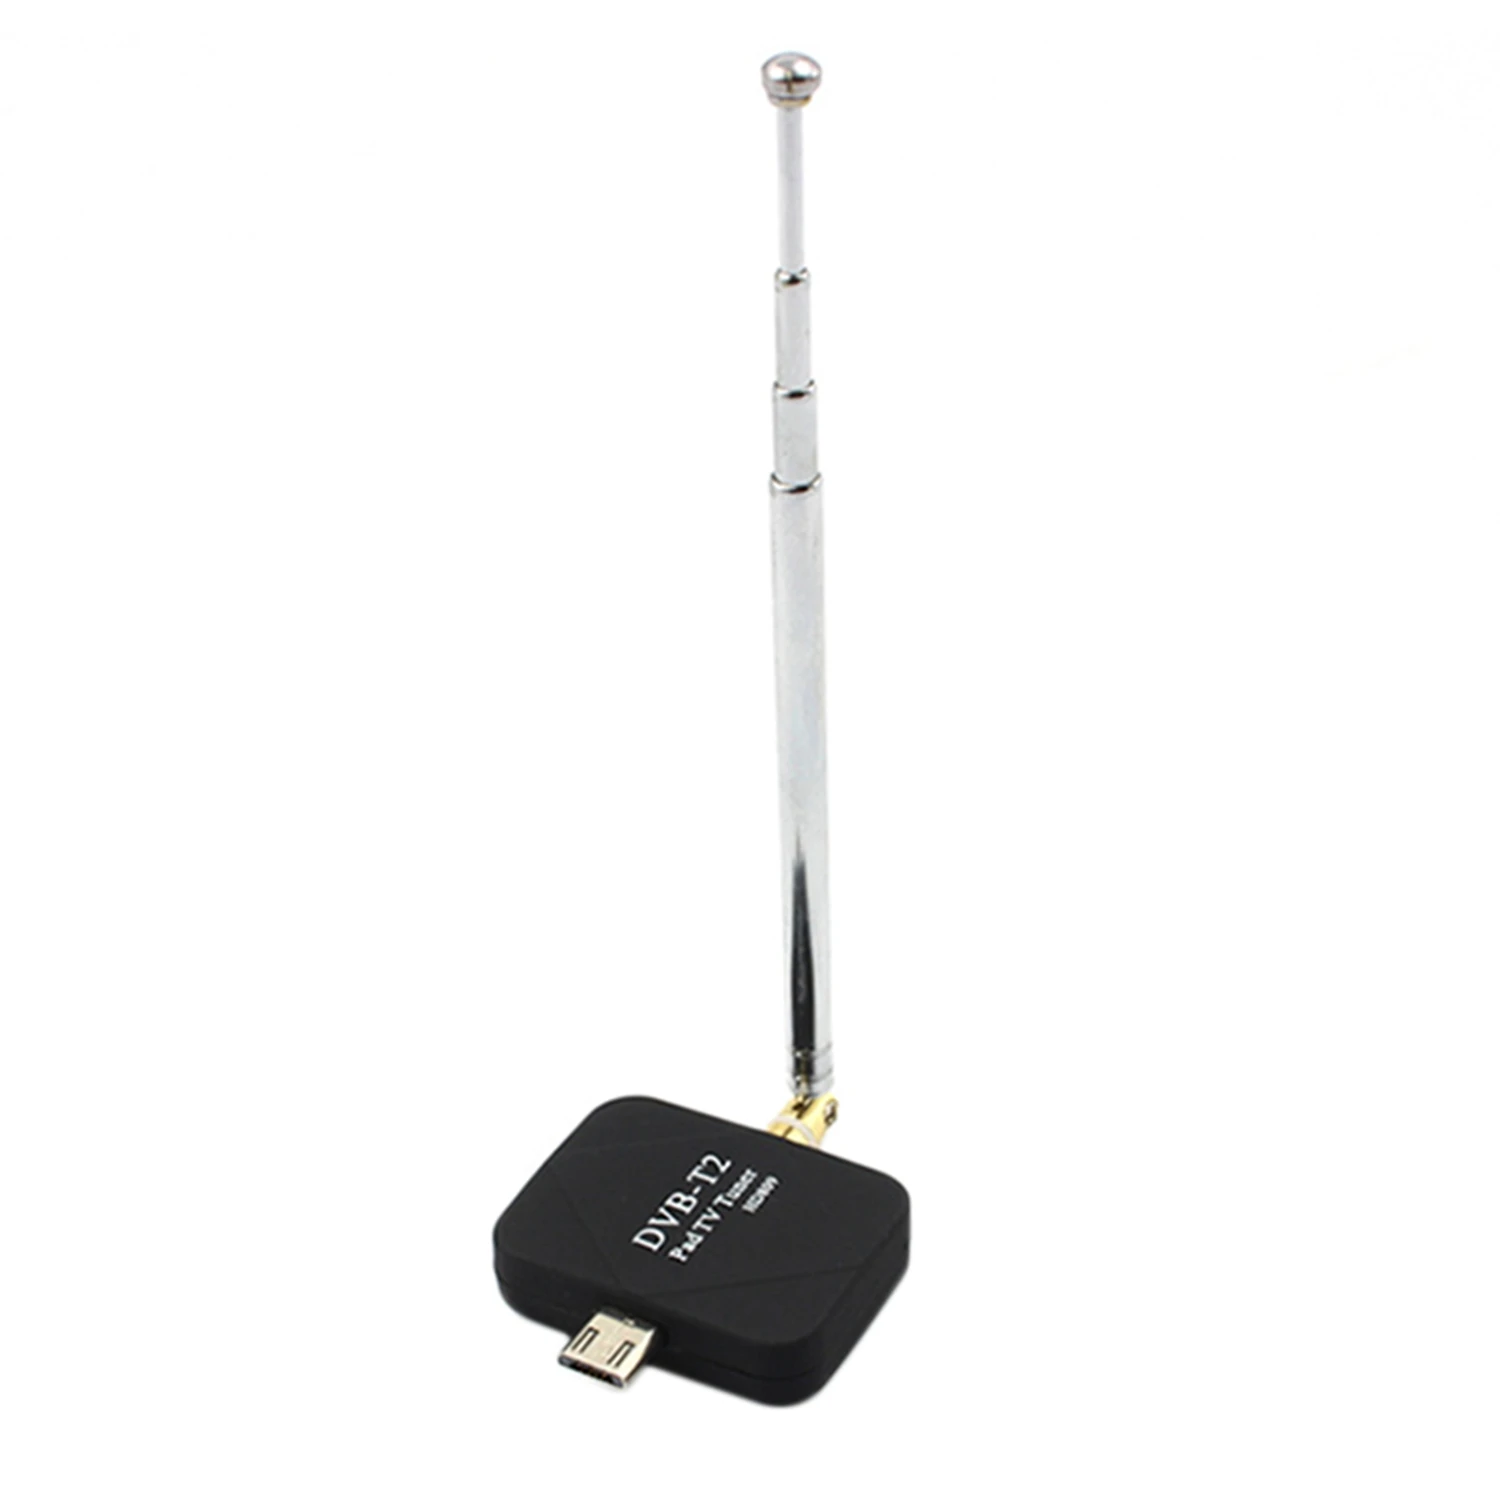 Suit for Europe no Germany USB Box Mobile Phone Receiver TV Stick Dongle with Antenna DVB-T2 HD Mini Digital TV Tuner for Android Phone/Pad /Africa/Middle East/Southeast Asia/Colombia 